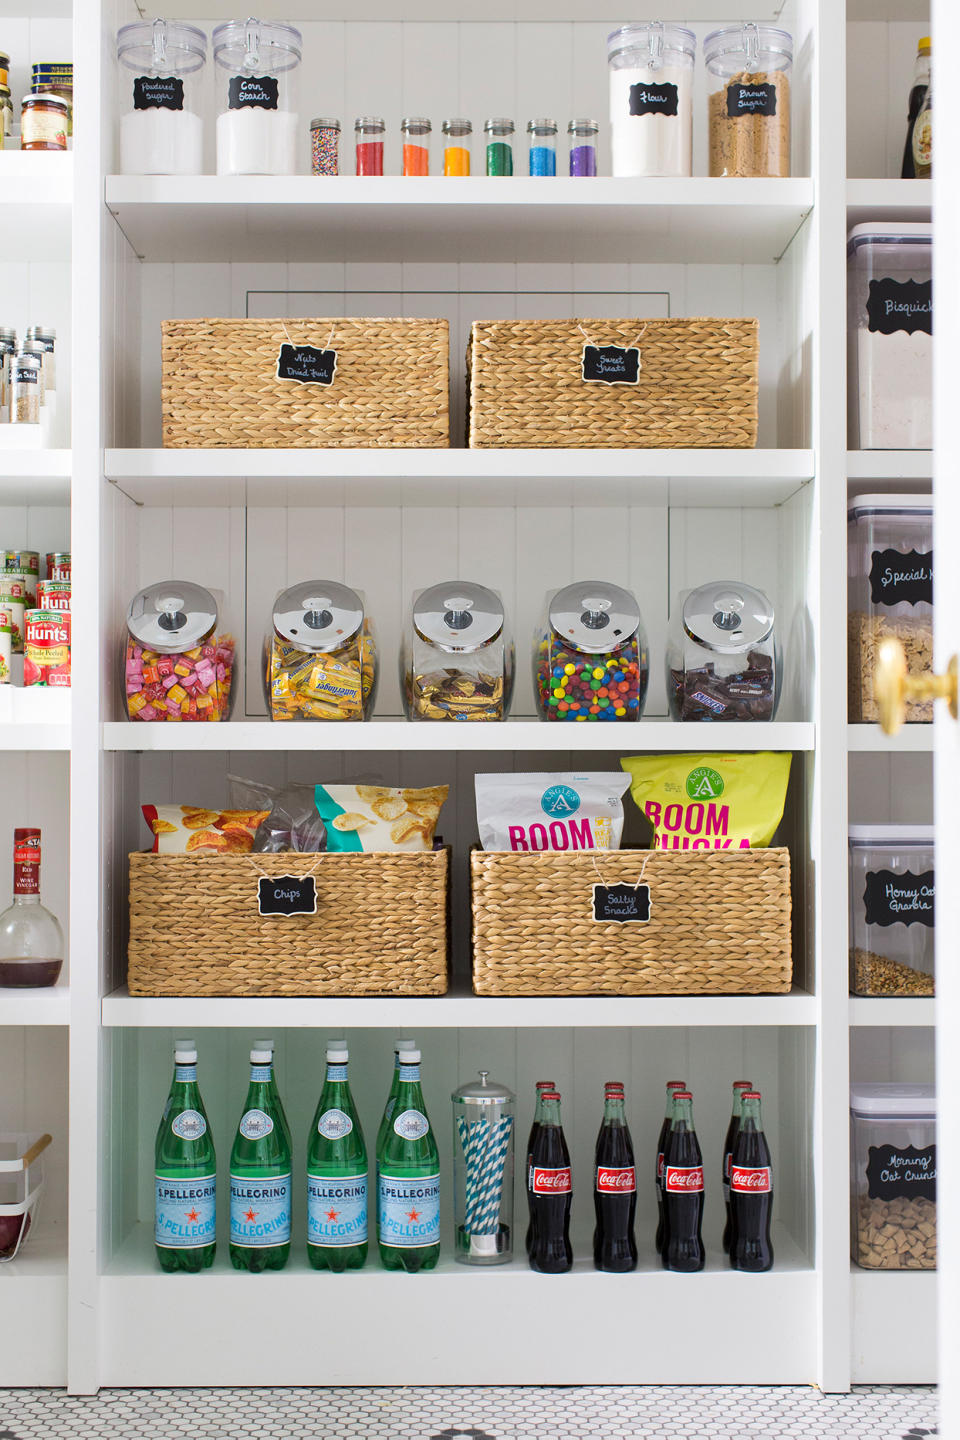 Use Baskets for Storage